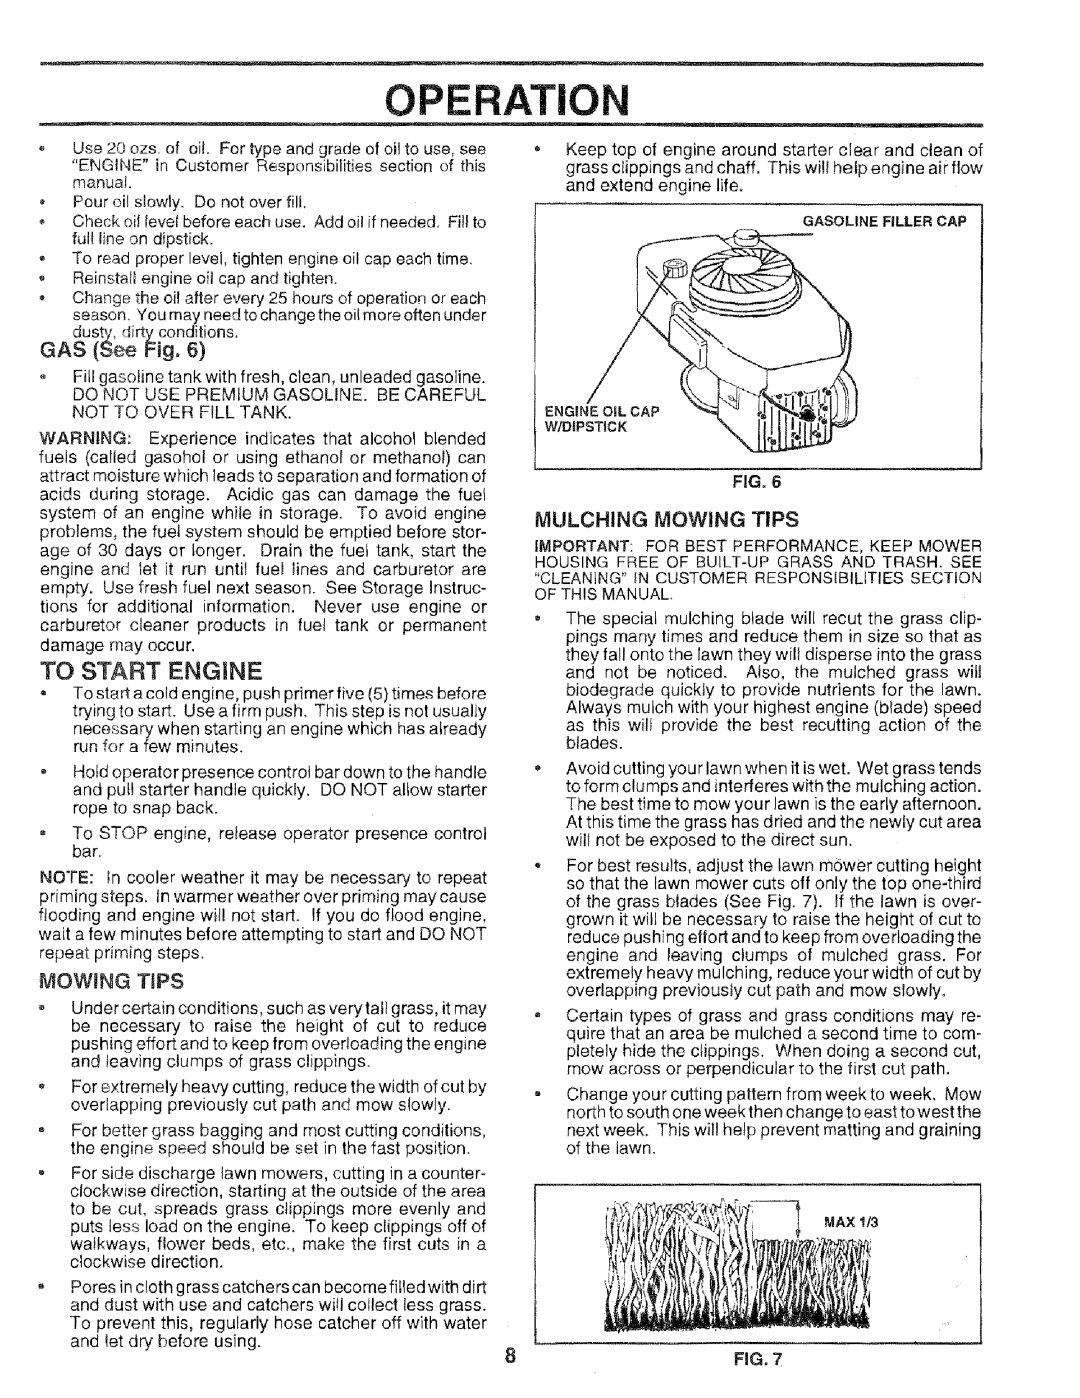 Sears 14.3, 975502, 917.377201 owner manual To Start Engine, GAS See Fig, Mulching Mowing Tips 